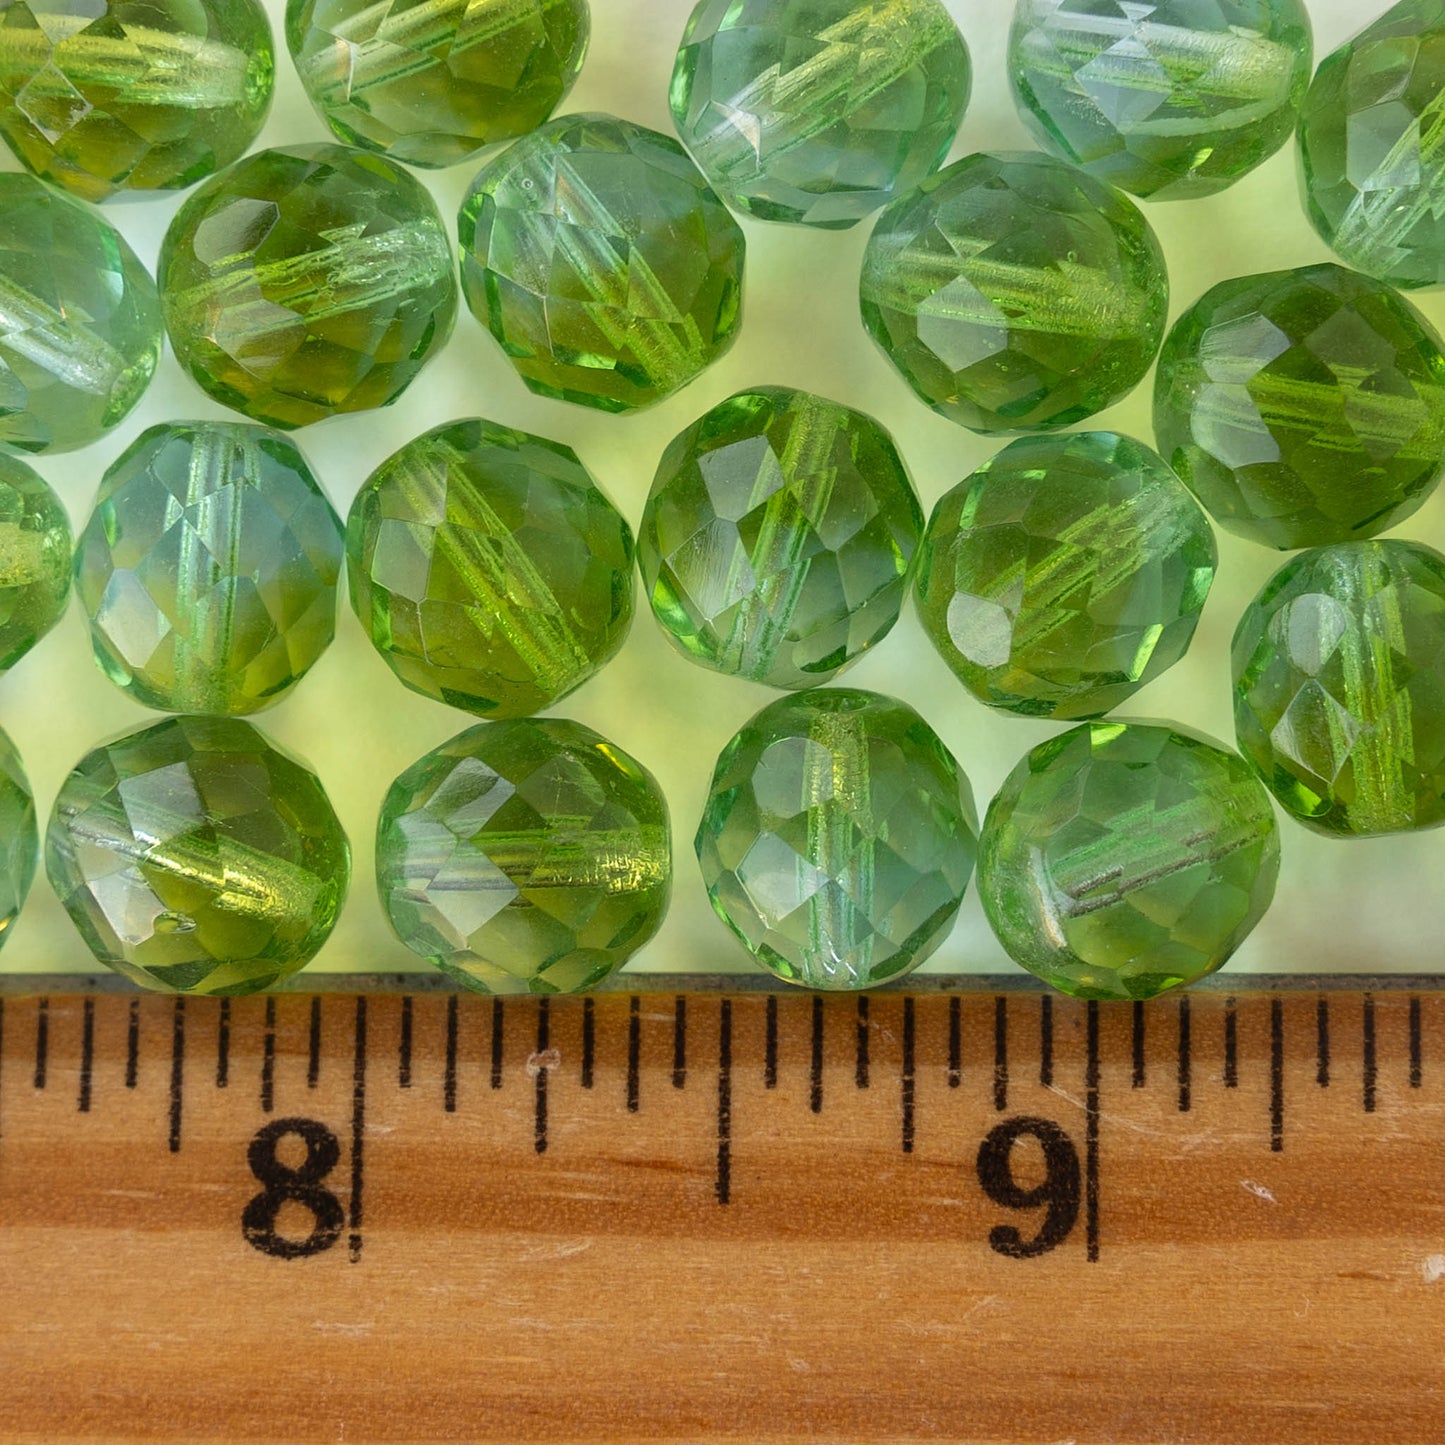 10mm Round Glass Beads - Two Tone Transparent Aqua and Green - 12 Beads